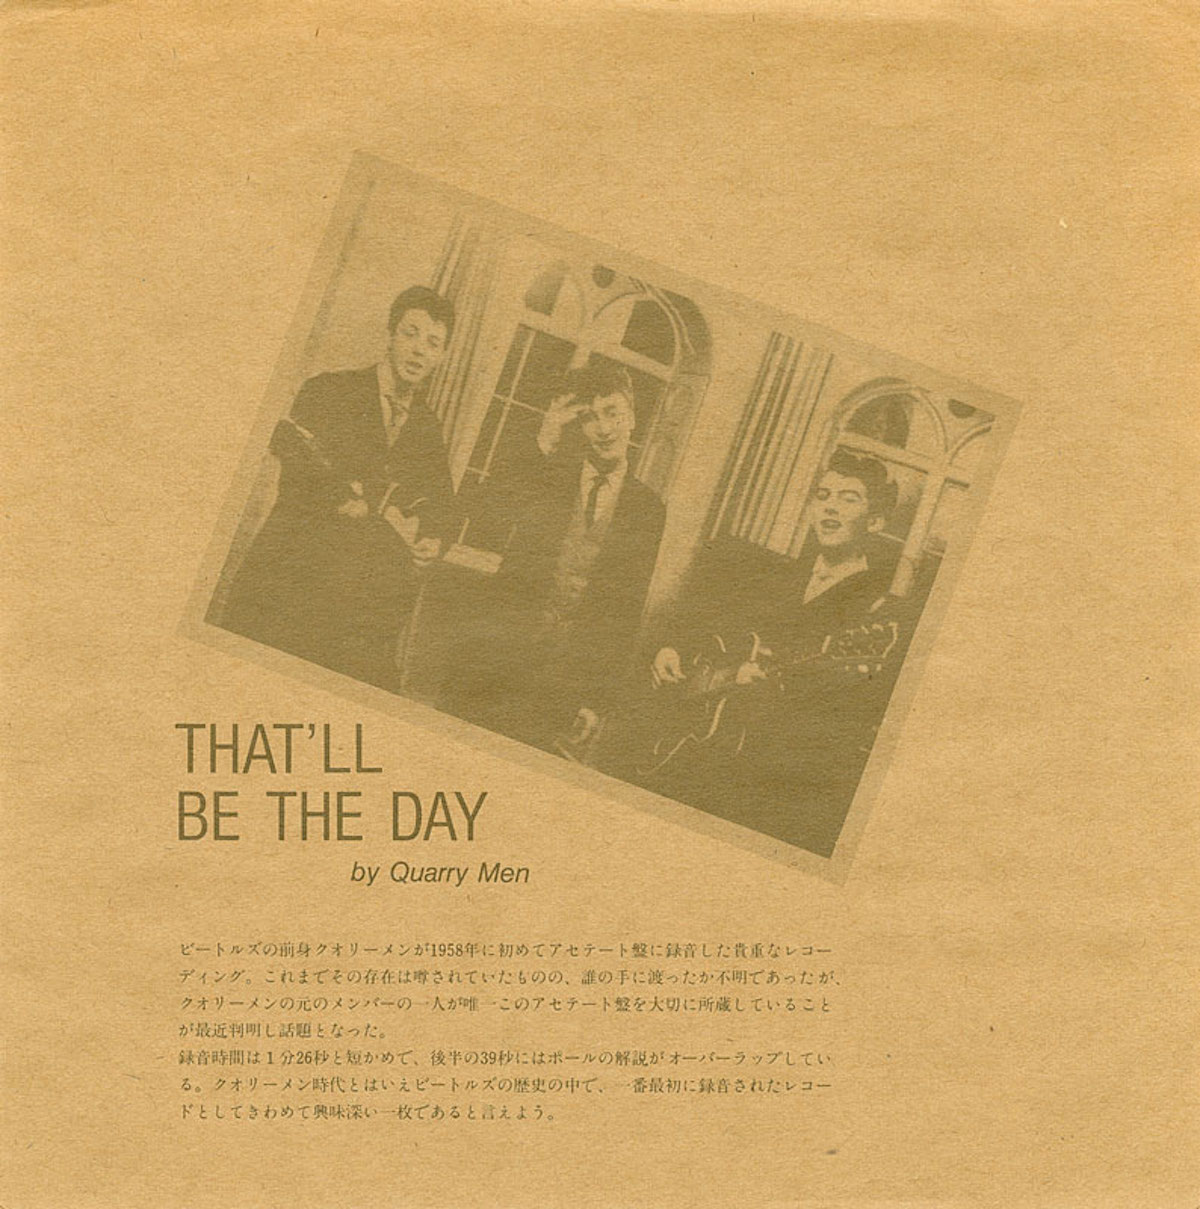 THAT’LL BE THE DAY/ IN SPITE OF ALL THE DANGER THE QUARRYMEN ЦЕНА: $180- 200 ТЫС. ГОД ИЗДАНИЯ: 1958